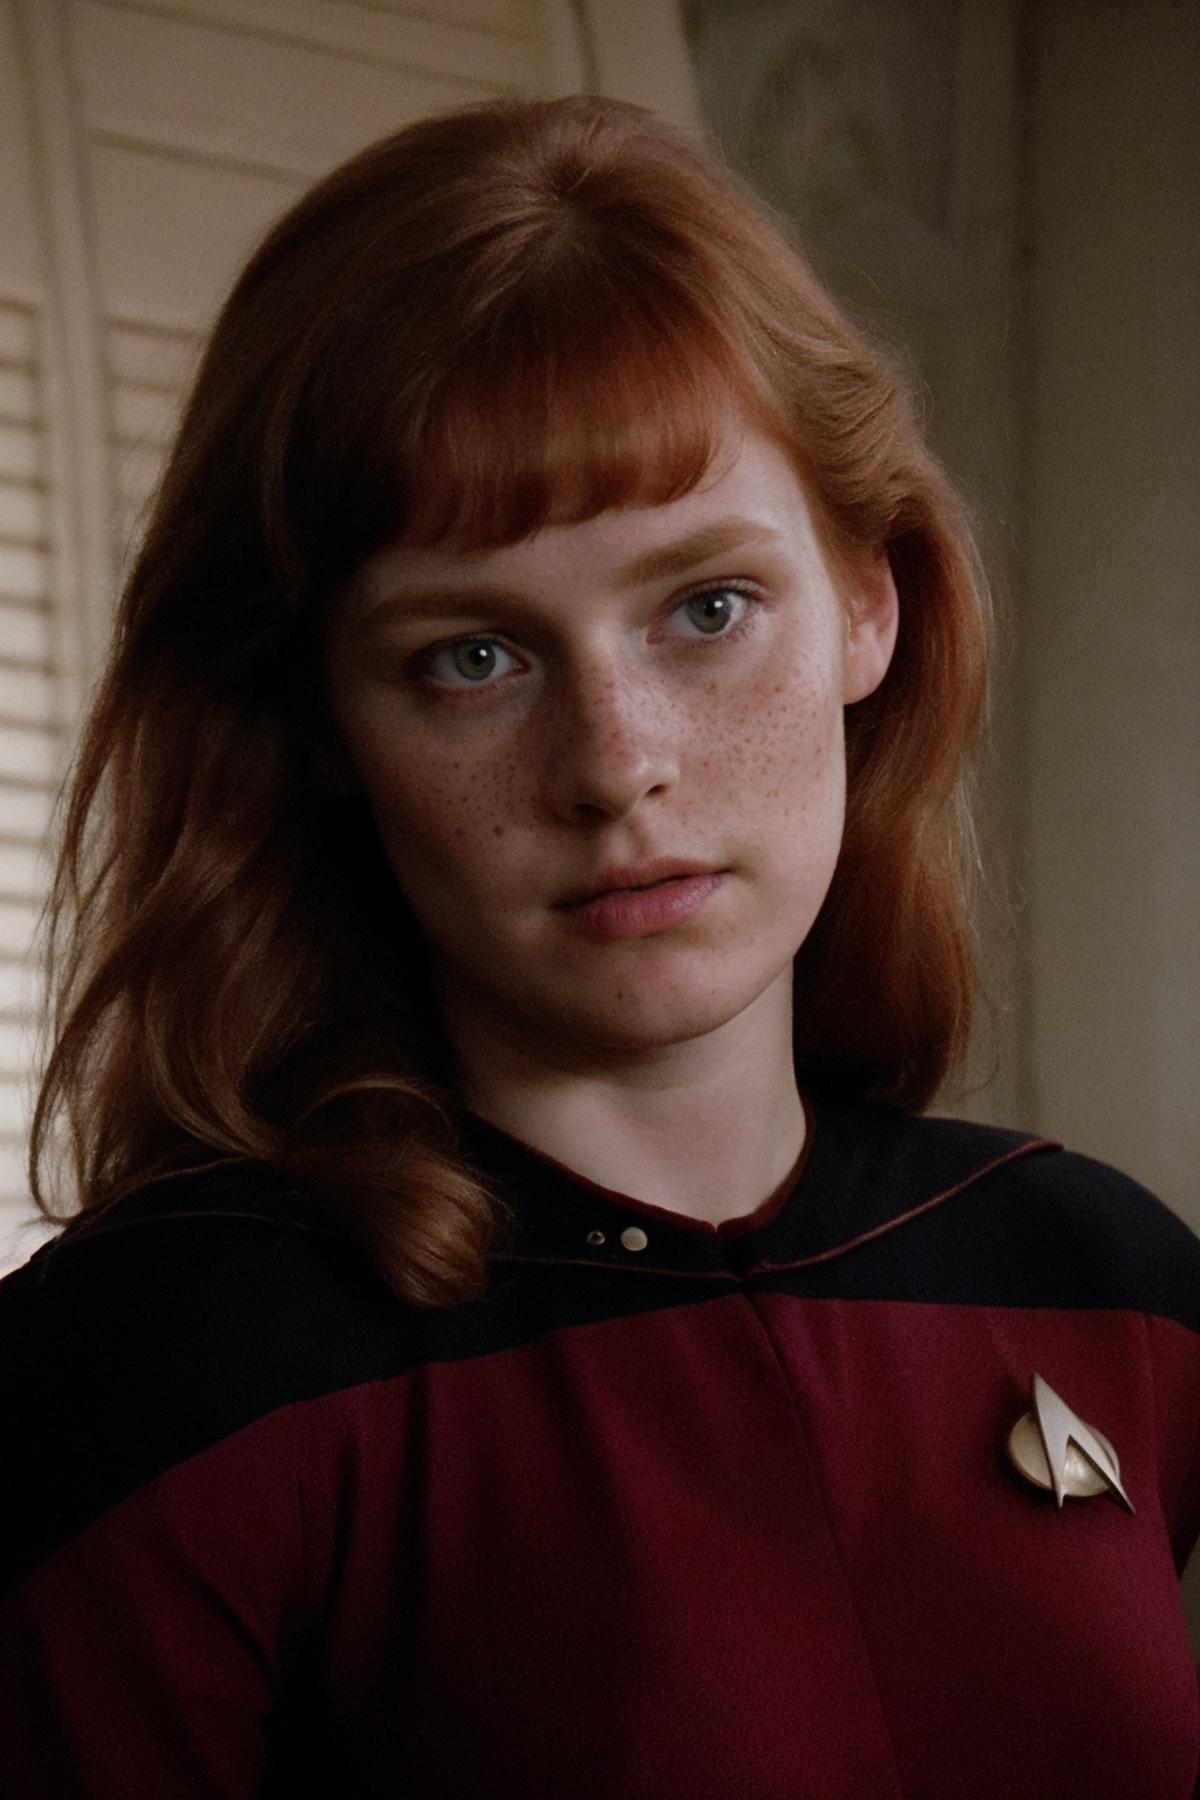 A young woman with red hair wearing a Star Trek shirt.